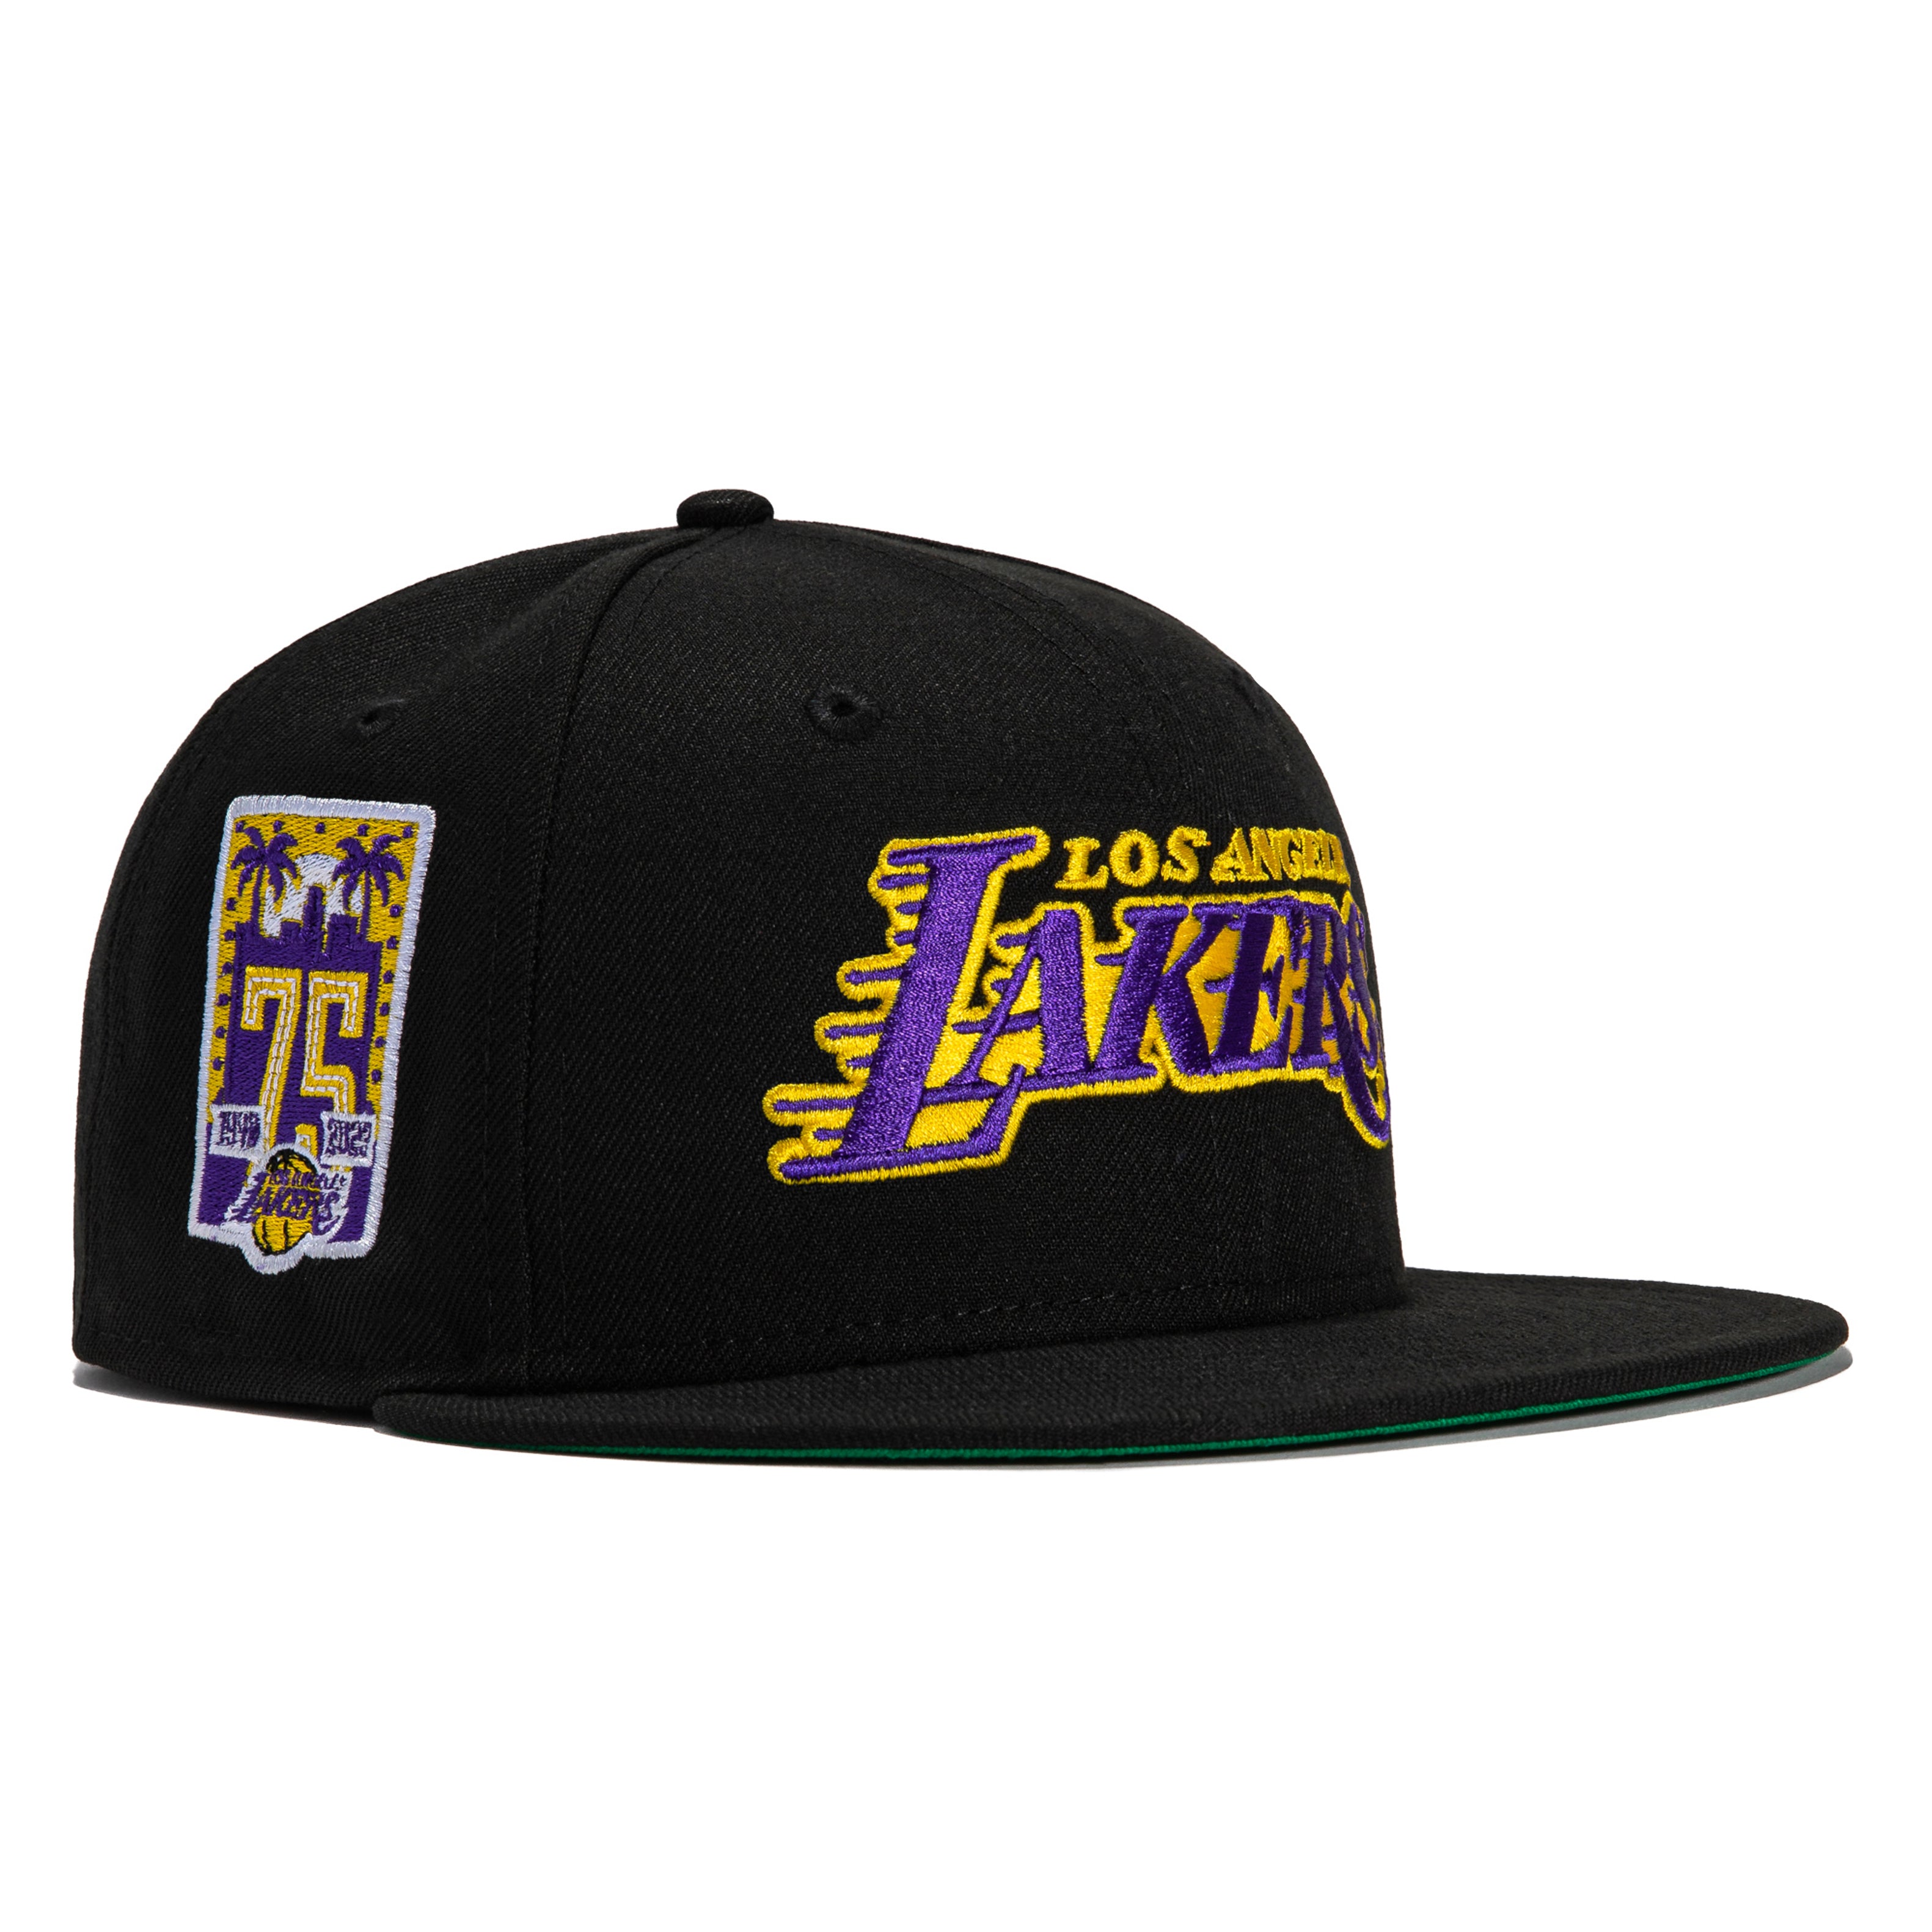 black and white lakers hat